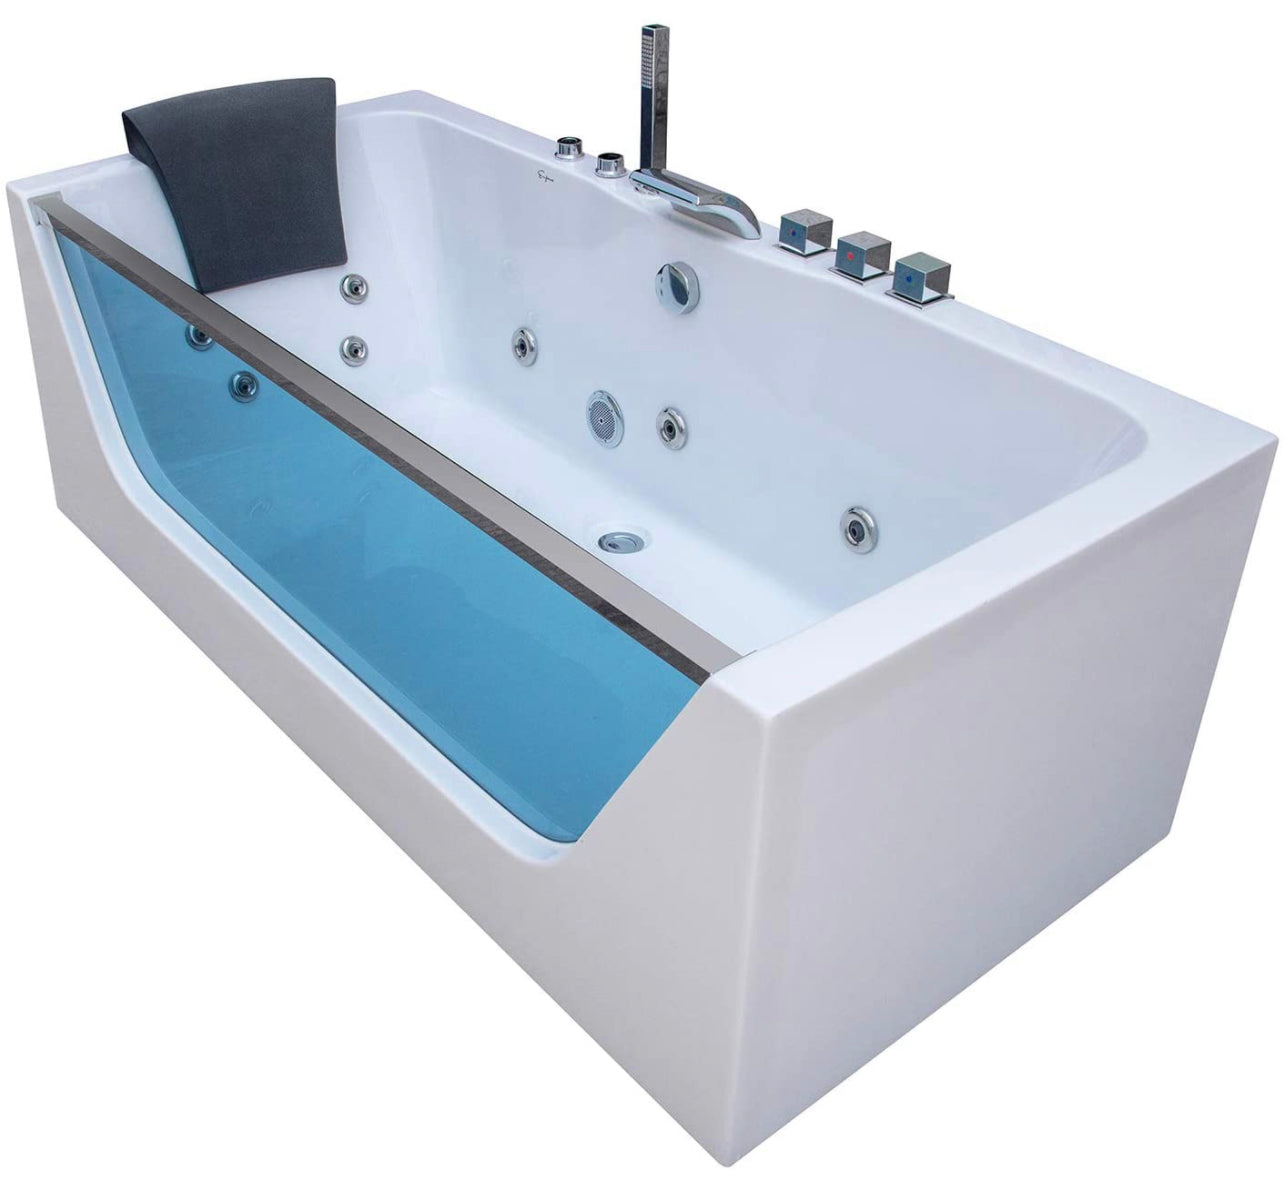 Empava 59 in. Acrylic Alcove Whirlpool Bathtub-Hydromassage Rectangular Jetted Soaking Tub with Center Drain-Waterfall Faucet, 59 Inch, White Discount Bros, LLC.